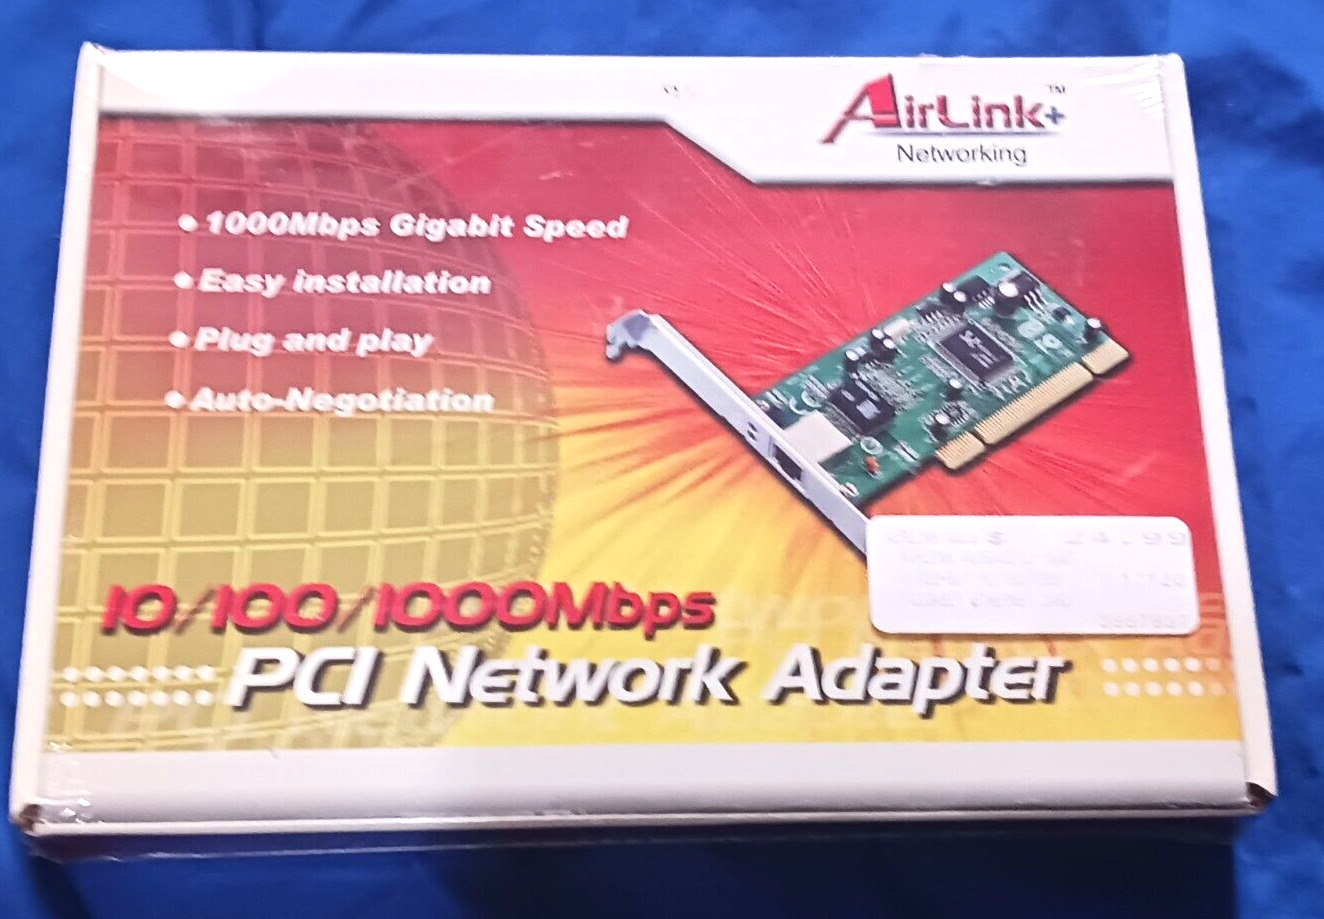 PC PCI 1000 Mbps Gigabit Network Adapter Card, 10/100/1000 Mbps